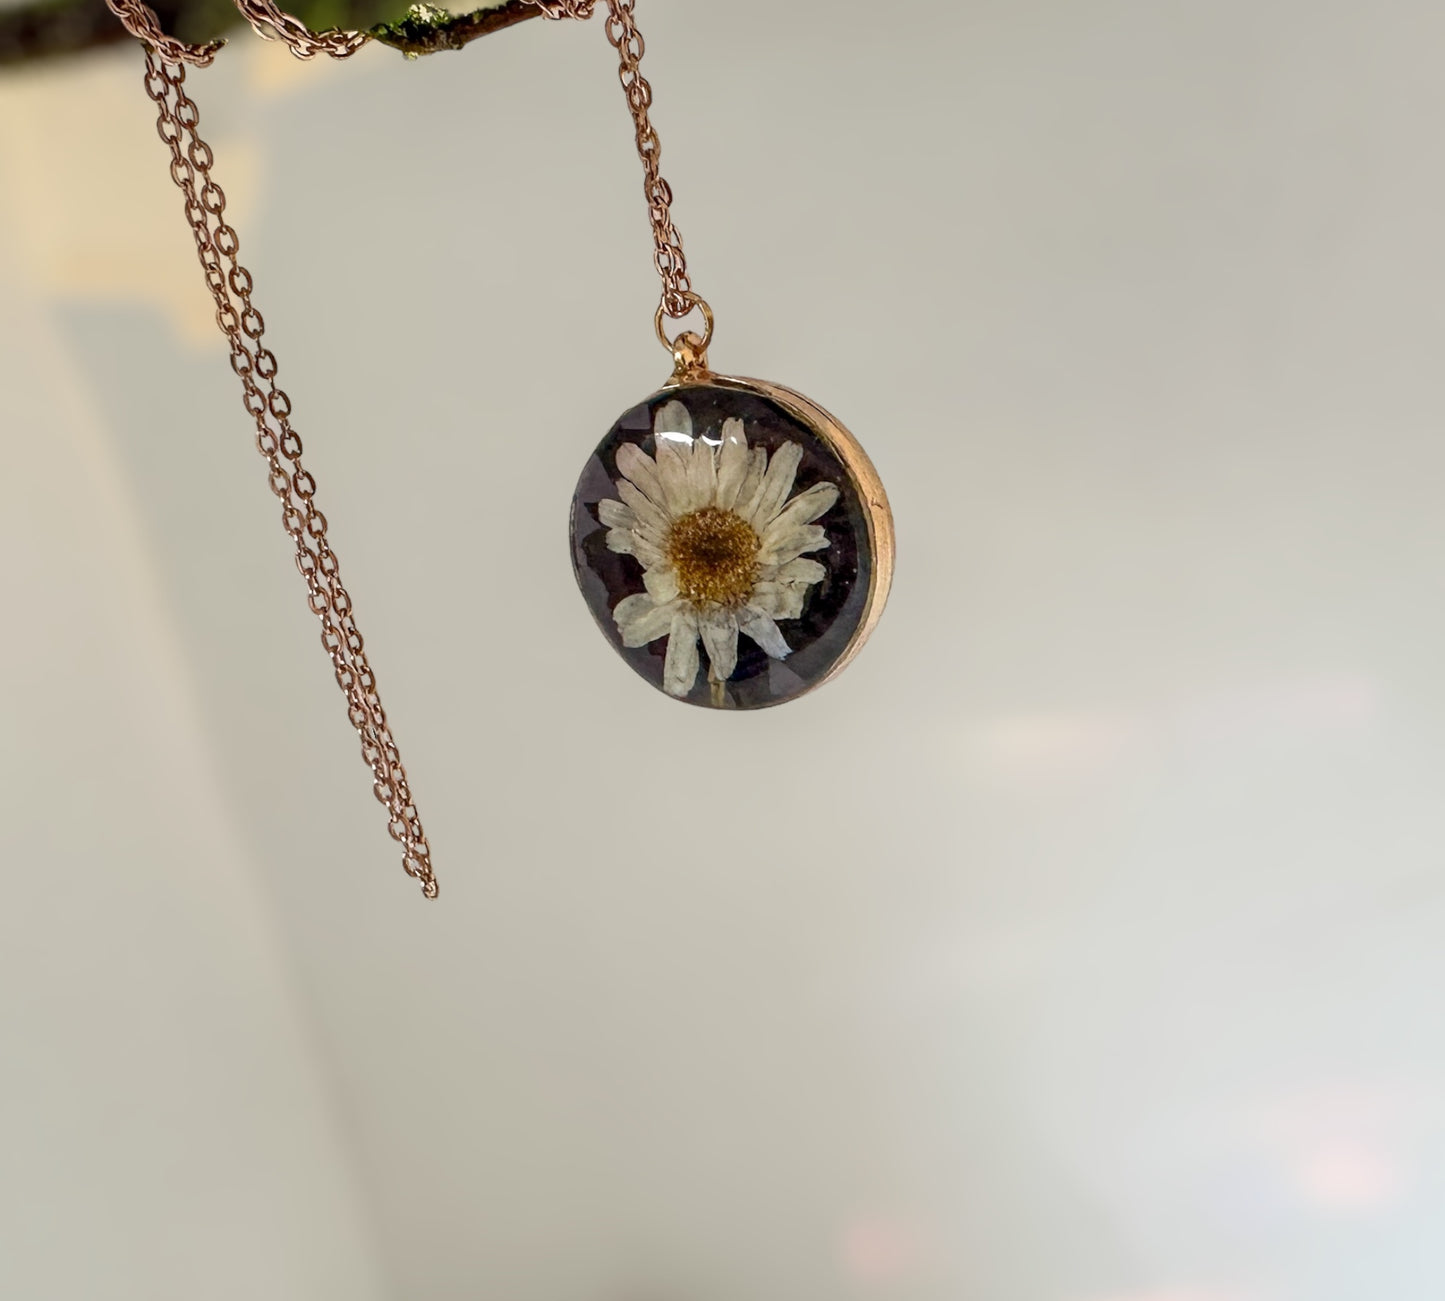 Daisy Pendant - Double Sided Nature-Inspired Daisy Flower Necklace